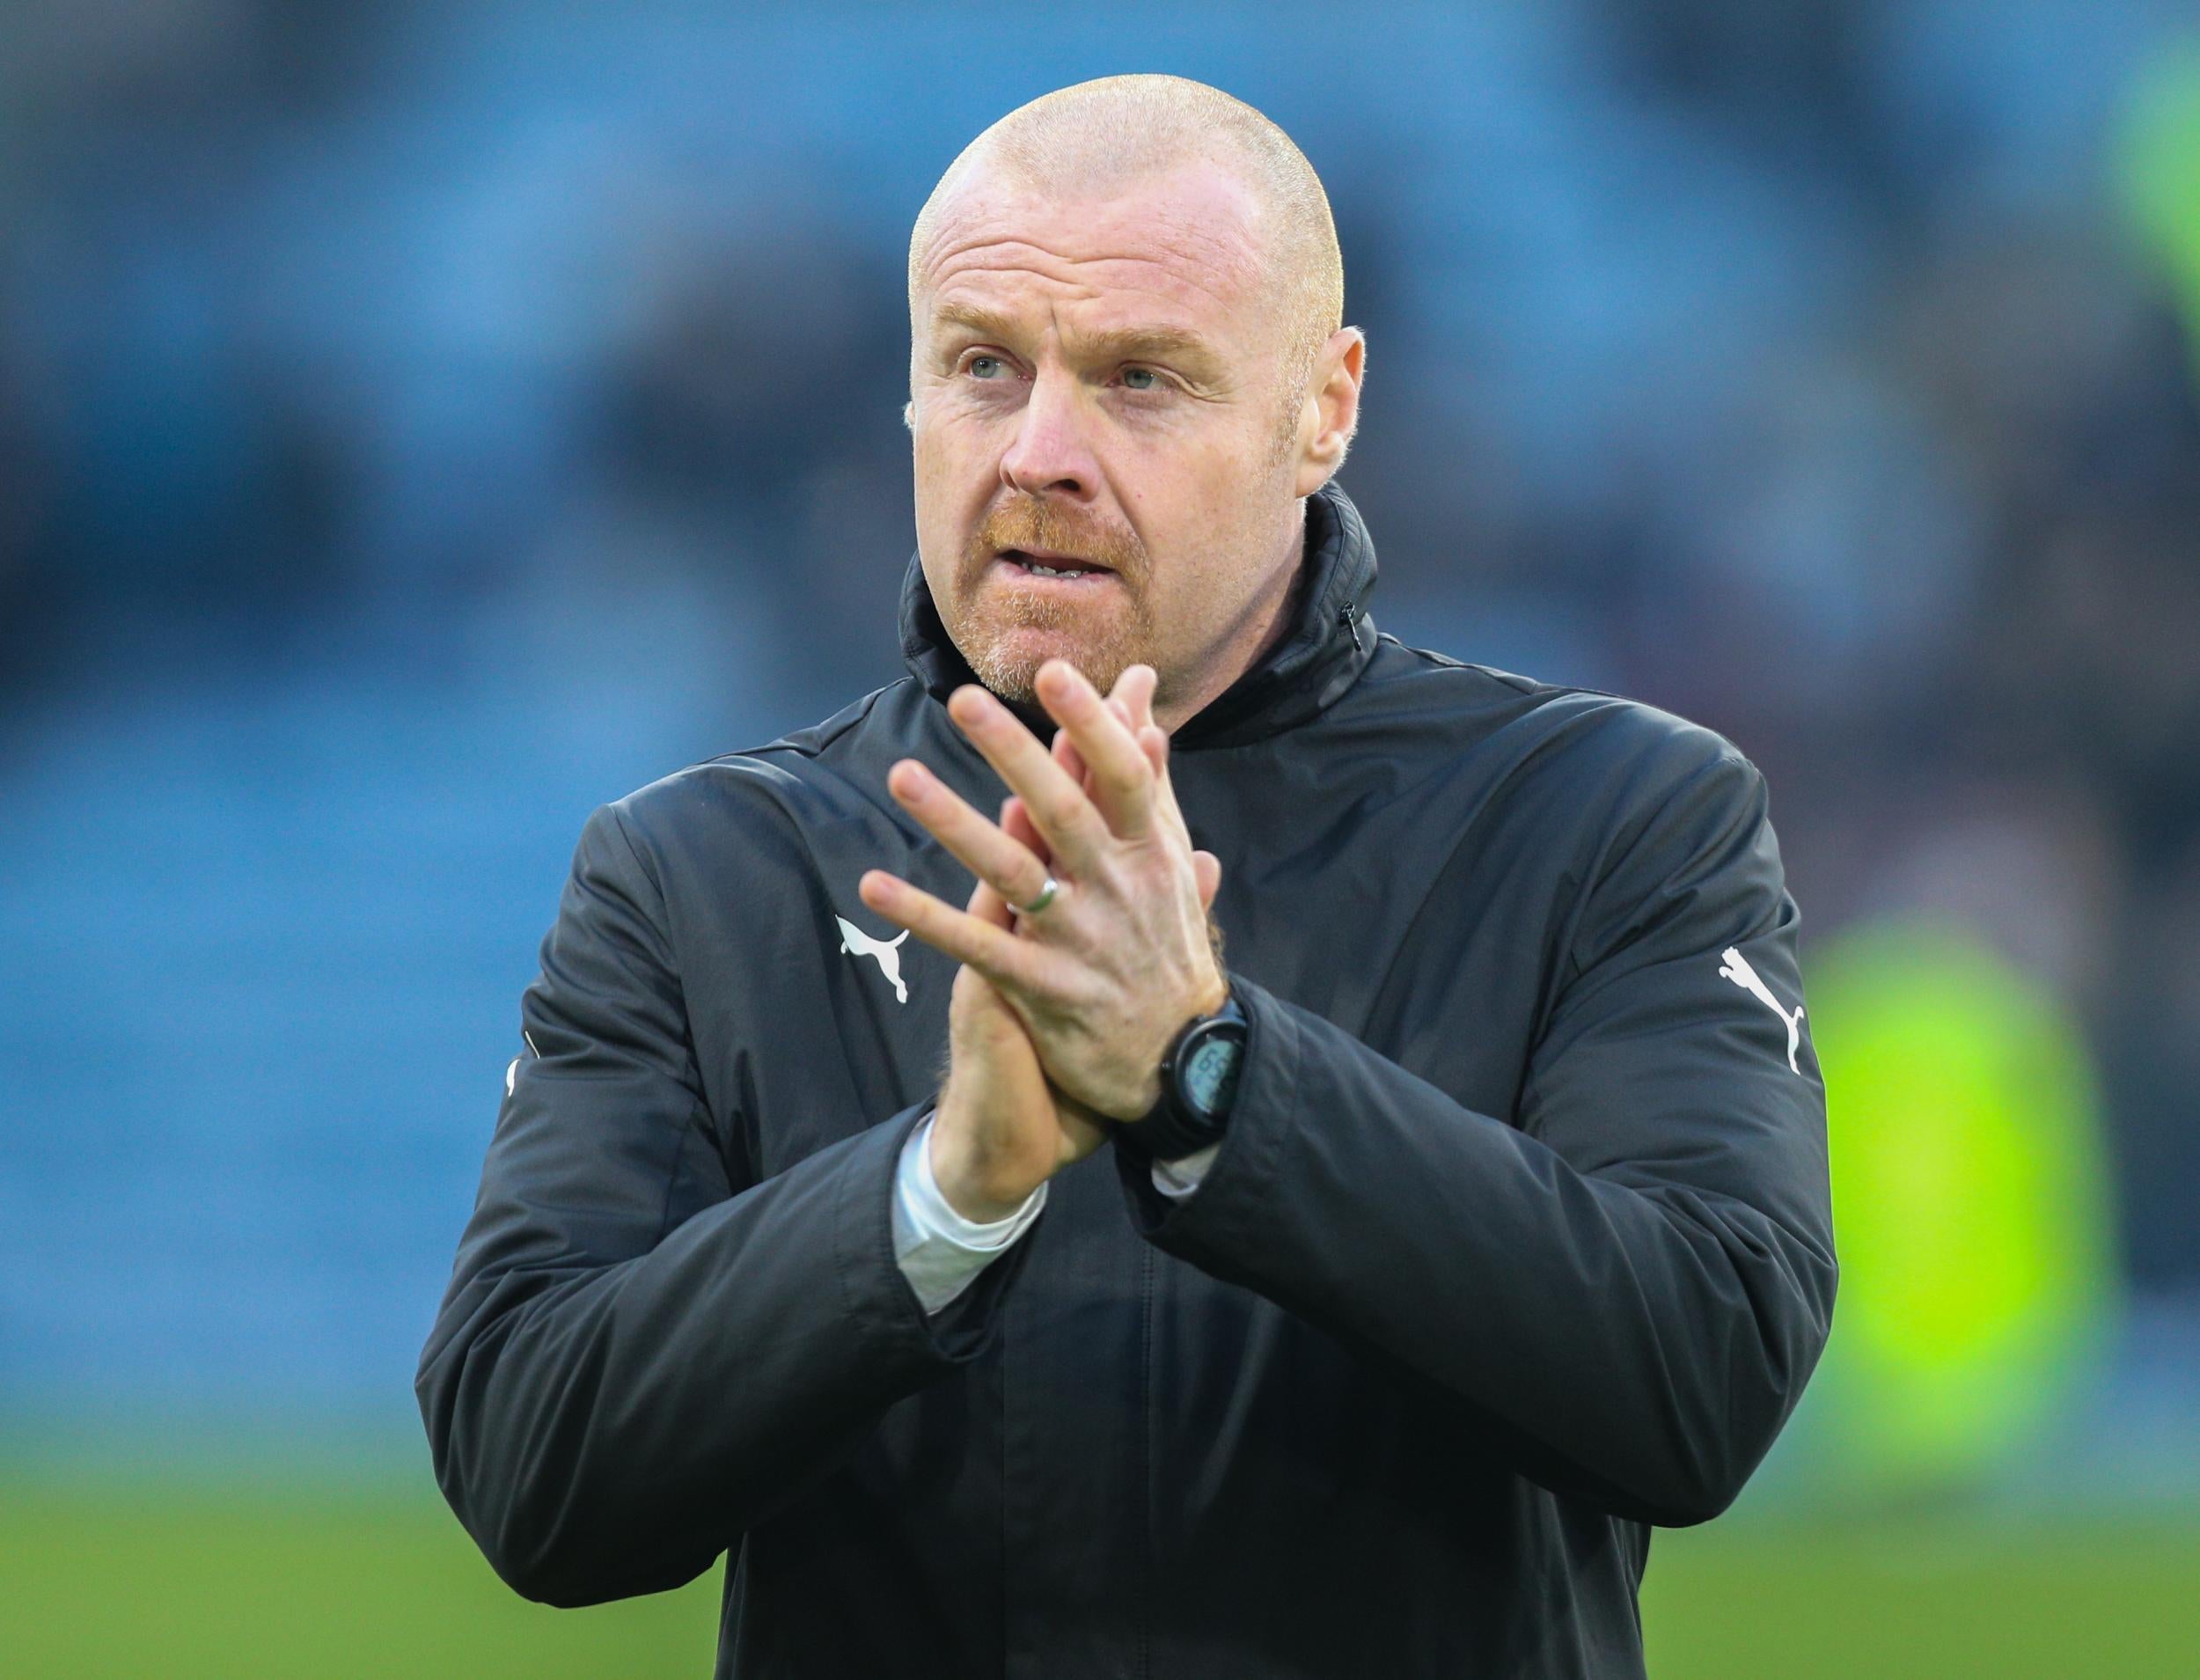 Sean Dyche's Burnley are sixth in the Premier League